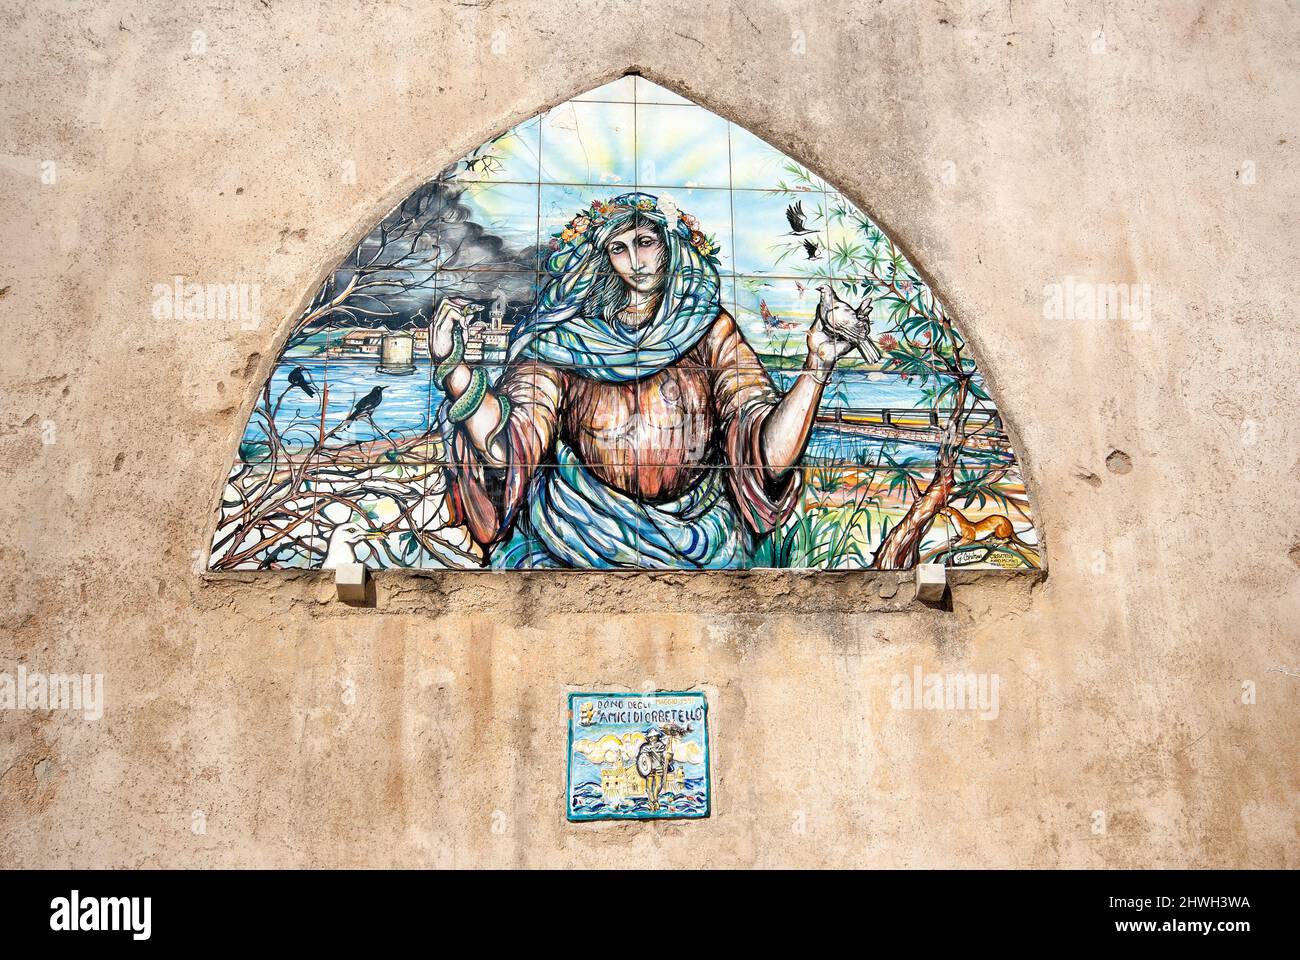 Painting on ceramic tiles (made in 1991 by the artist Gianni Capitani) on the wall of the historic center of Orbetello, Tuscany, Italy Stock Photo